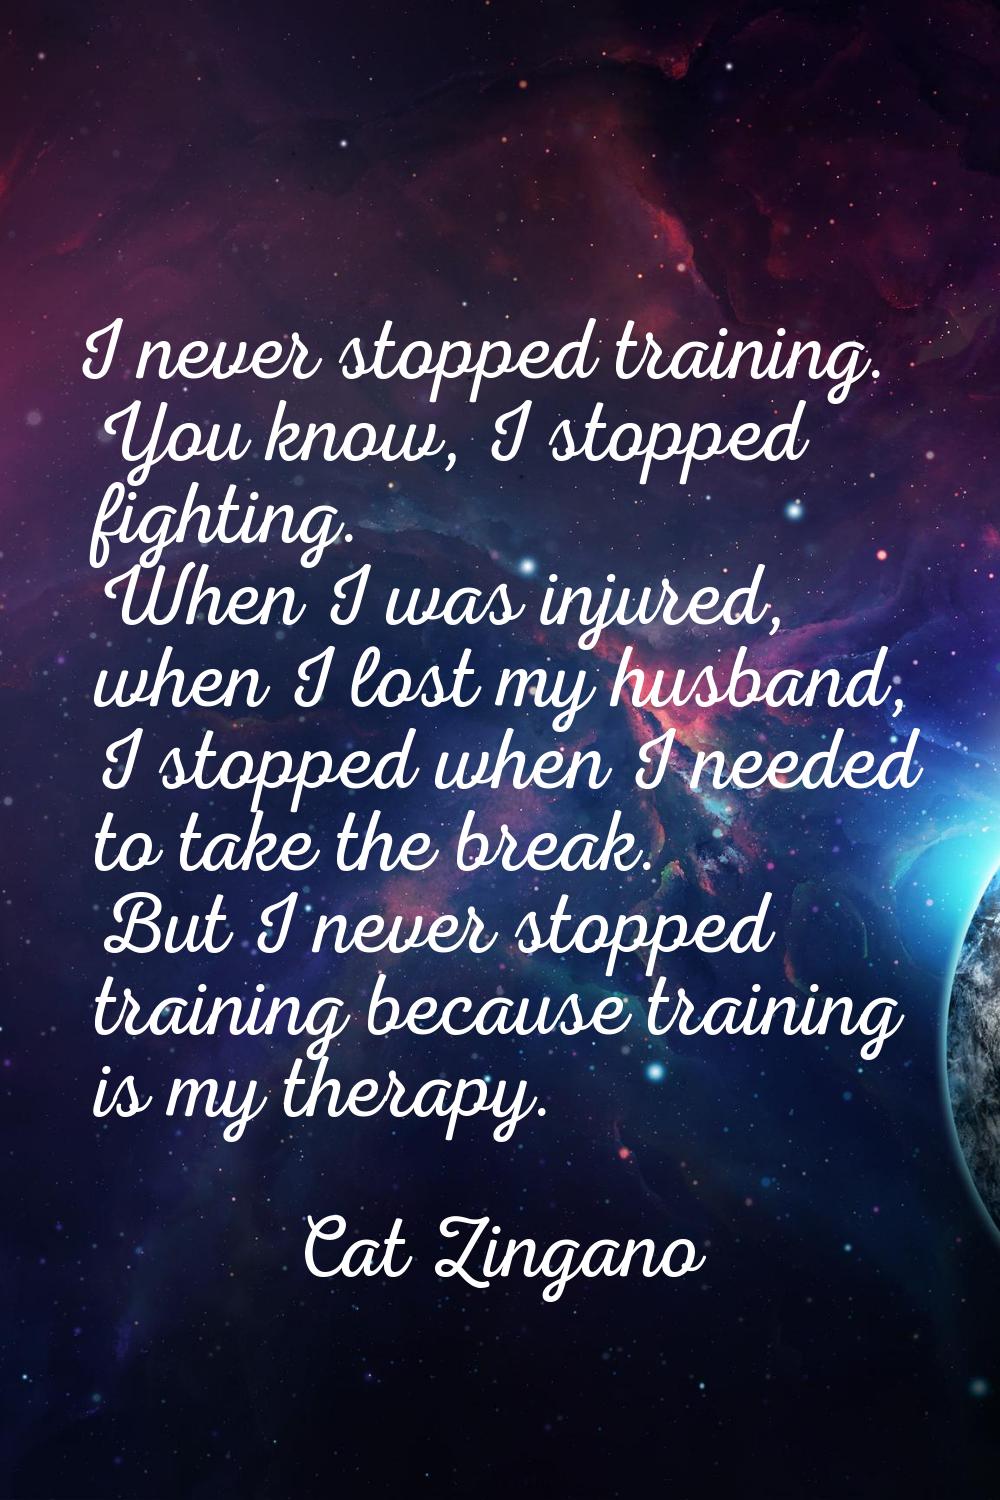 I never stopped training. You know, I stopped fighting. When I was injured, when I lost my husband,